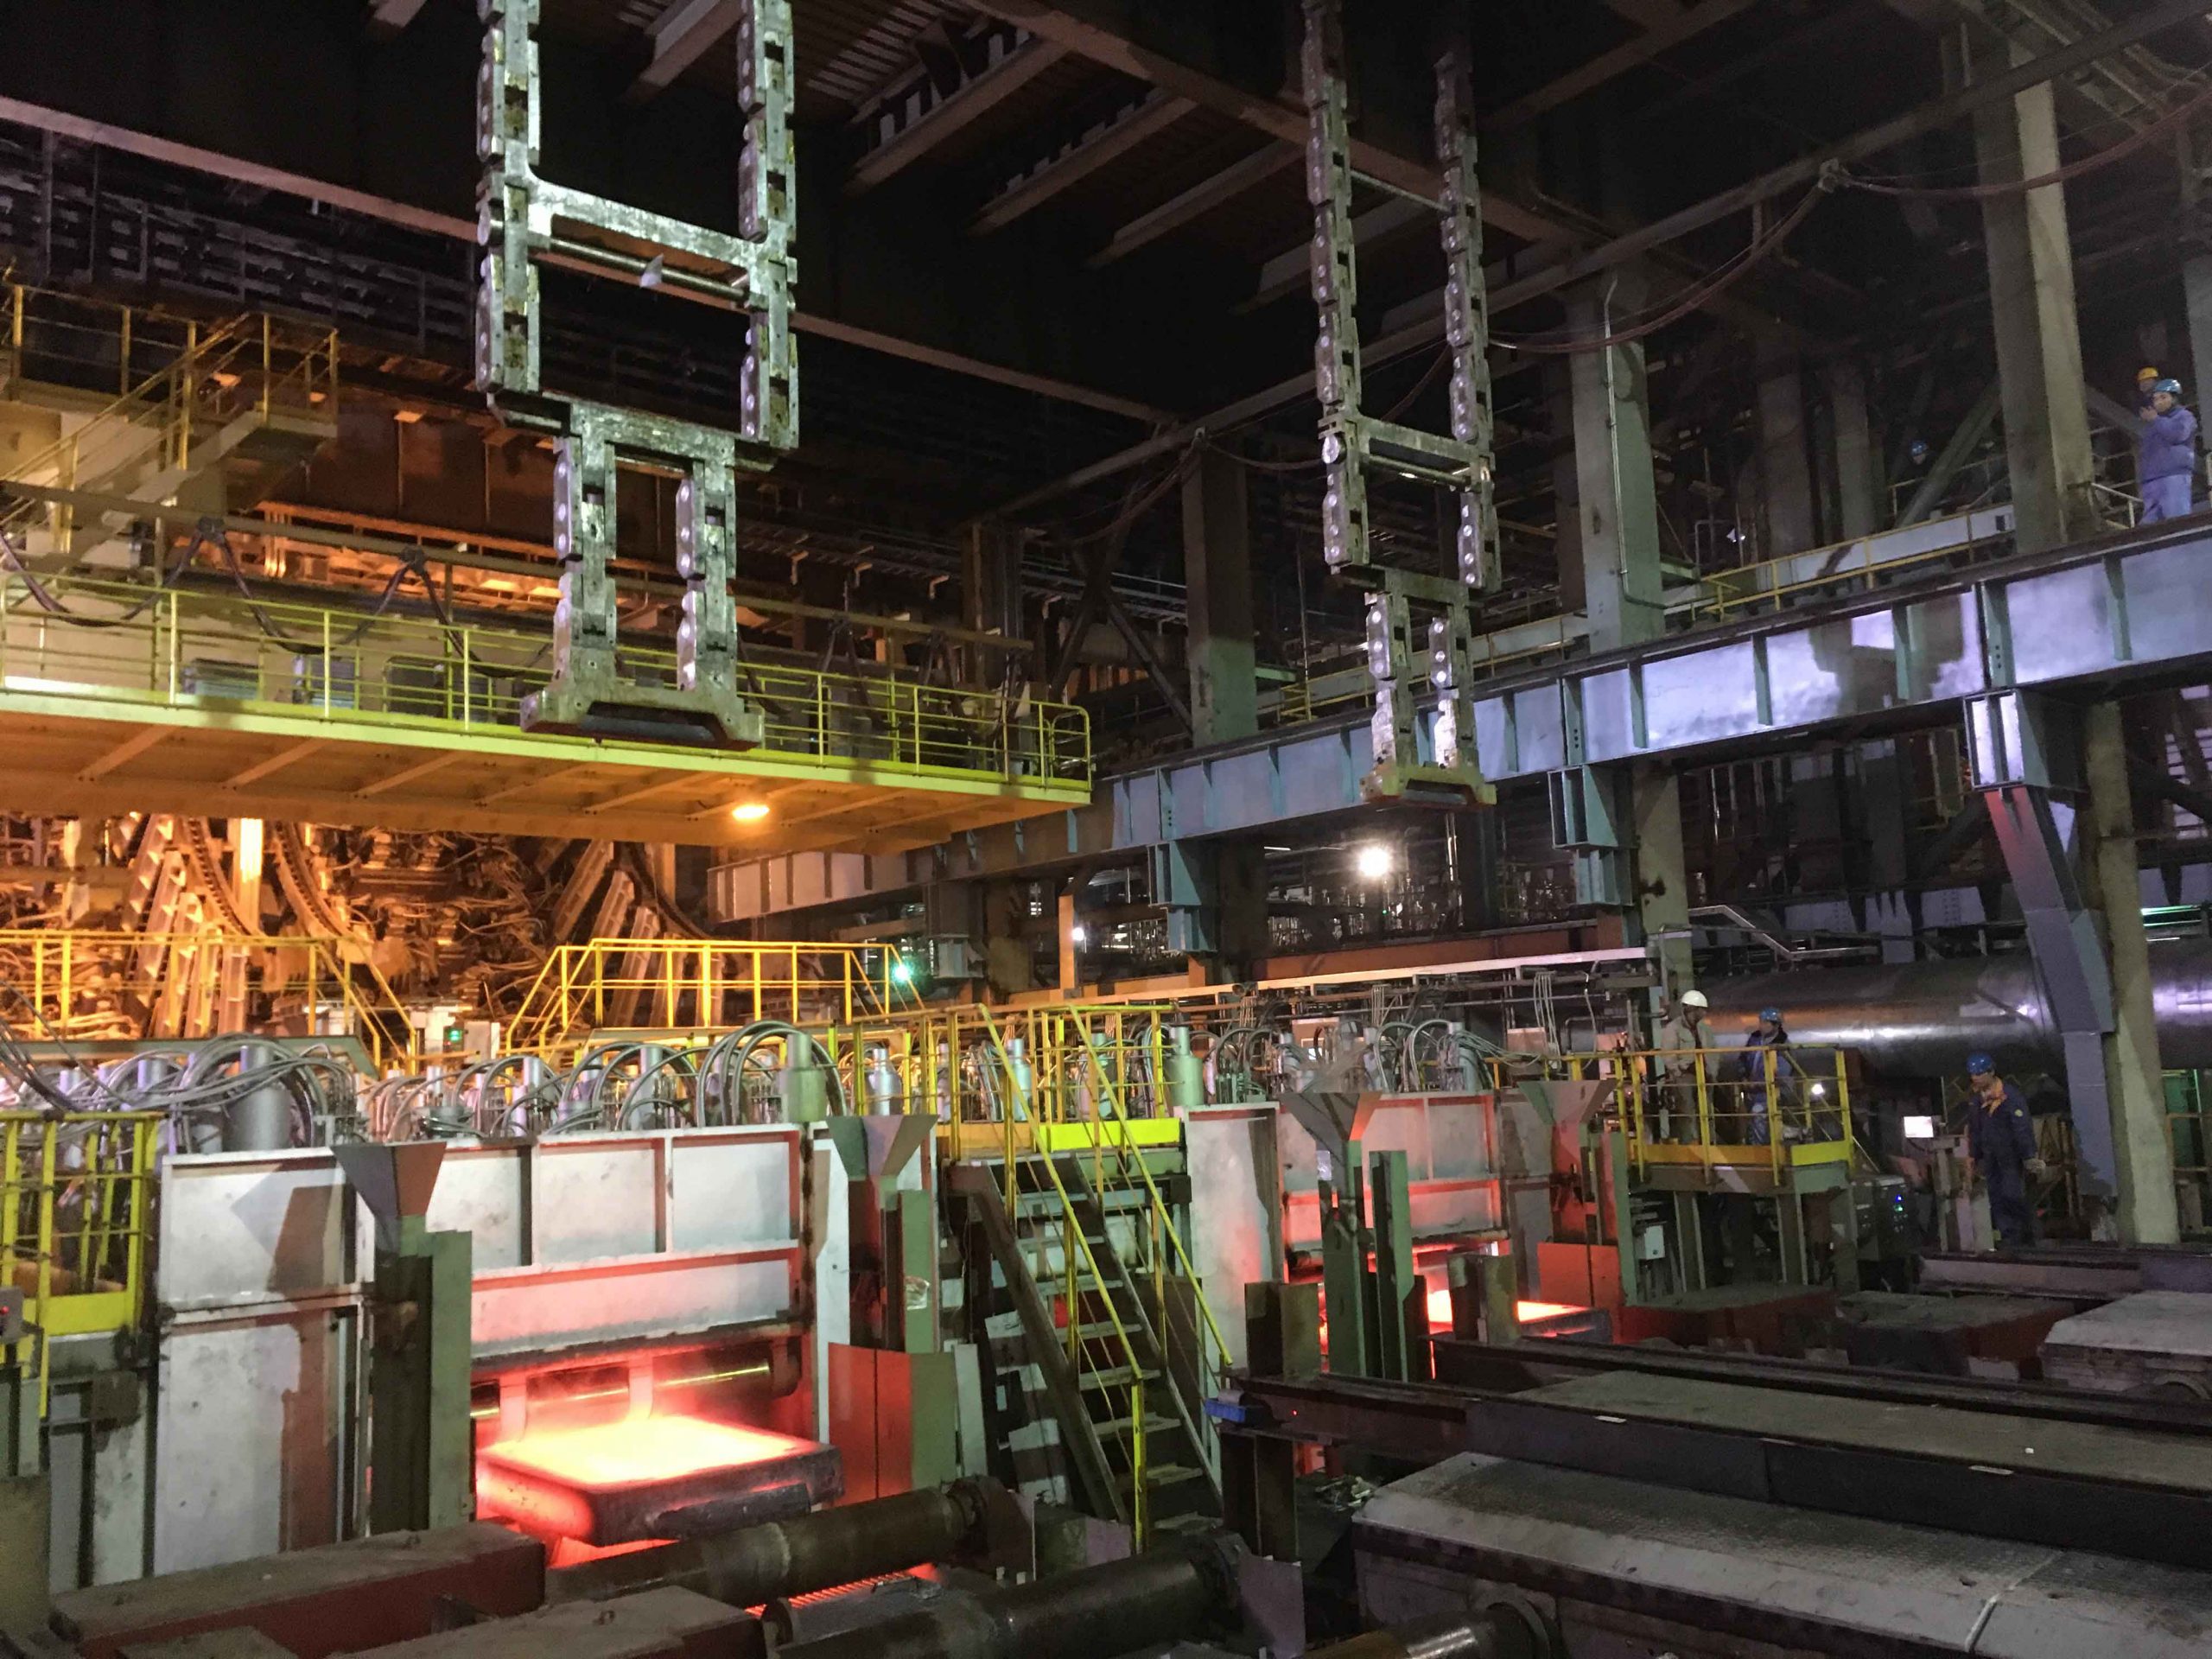 Fully automatic dummy bar system from Primetals Technologies receives FAC at Baosteel